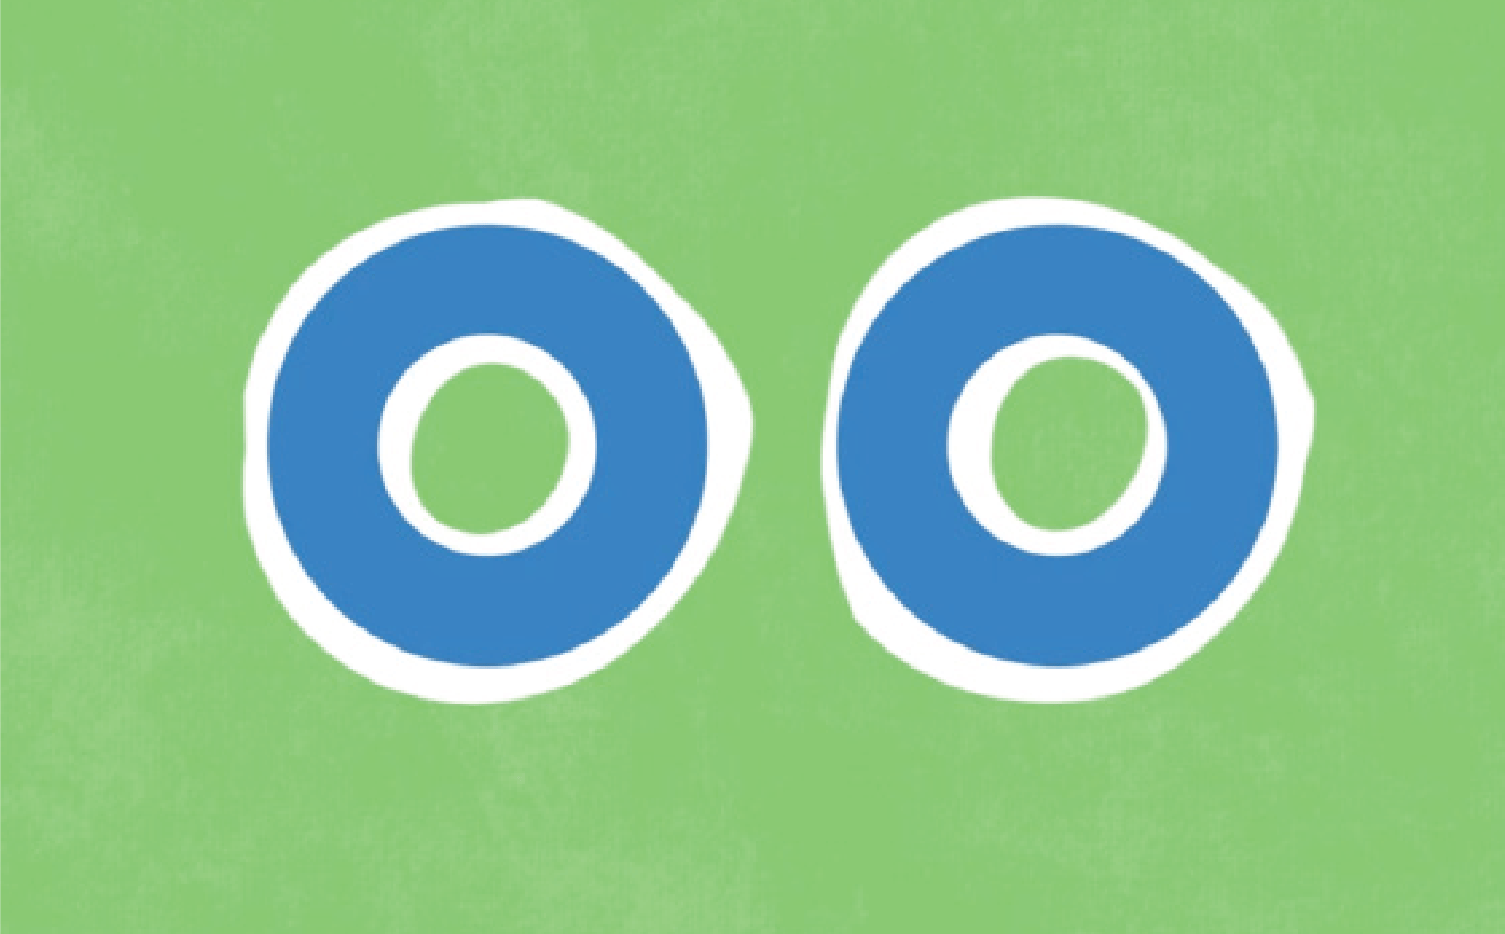 Two blue and white concentric circles resembling eyes on a green background, symbolizing the focus of an online language arts curriculum.